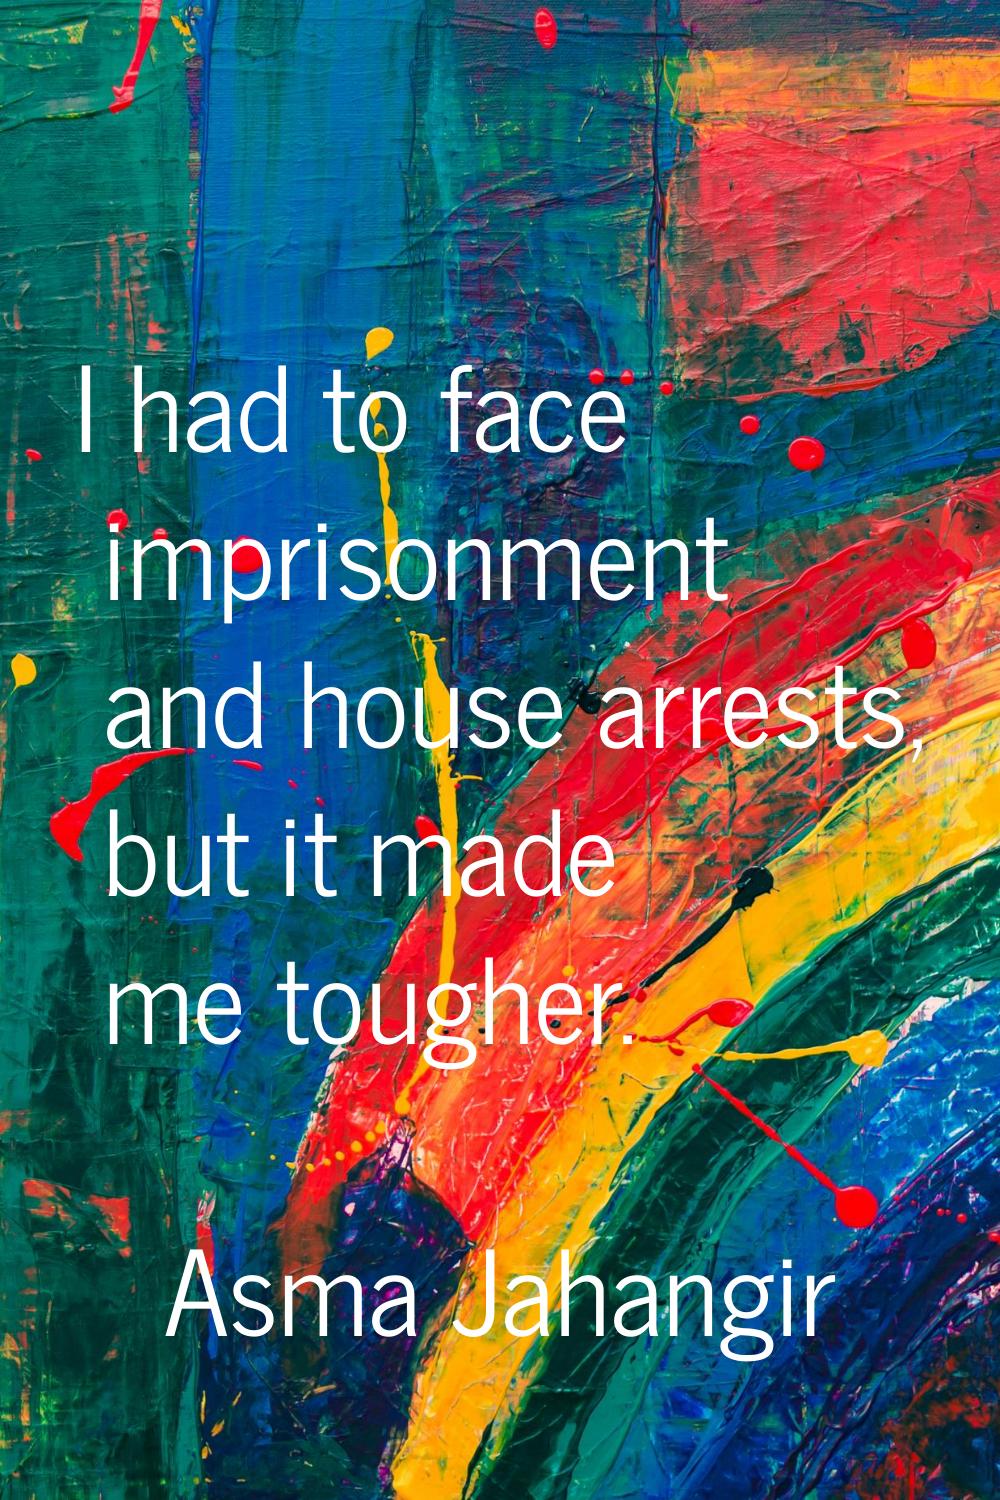 I had to face imprisonment and house arrests, but it made me tougher.